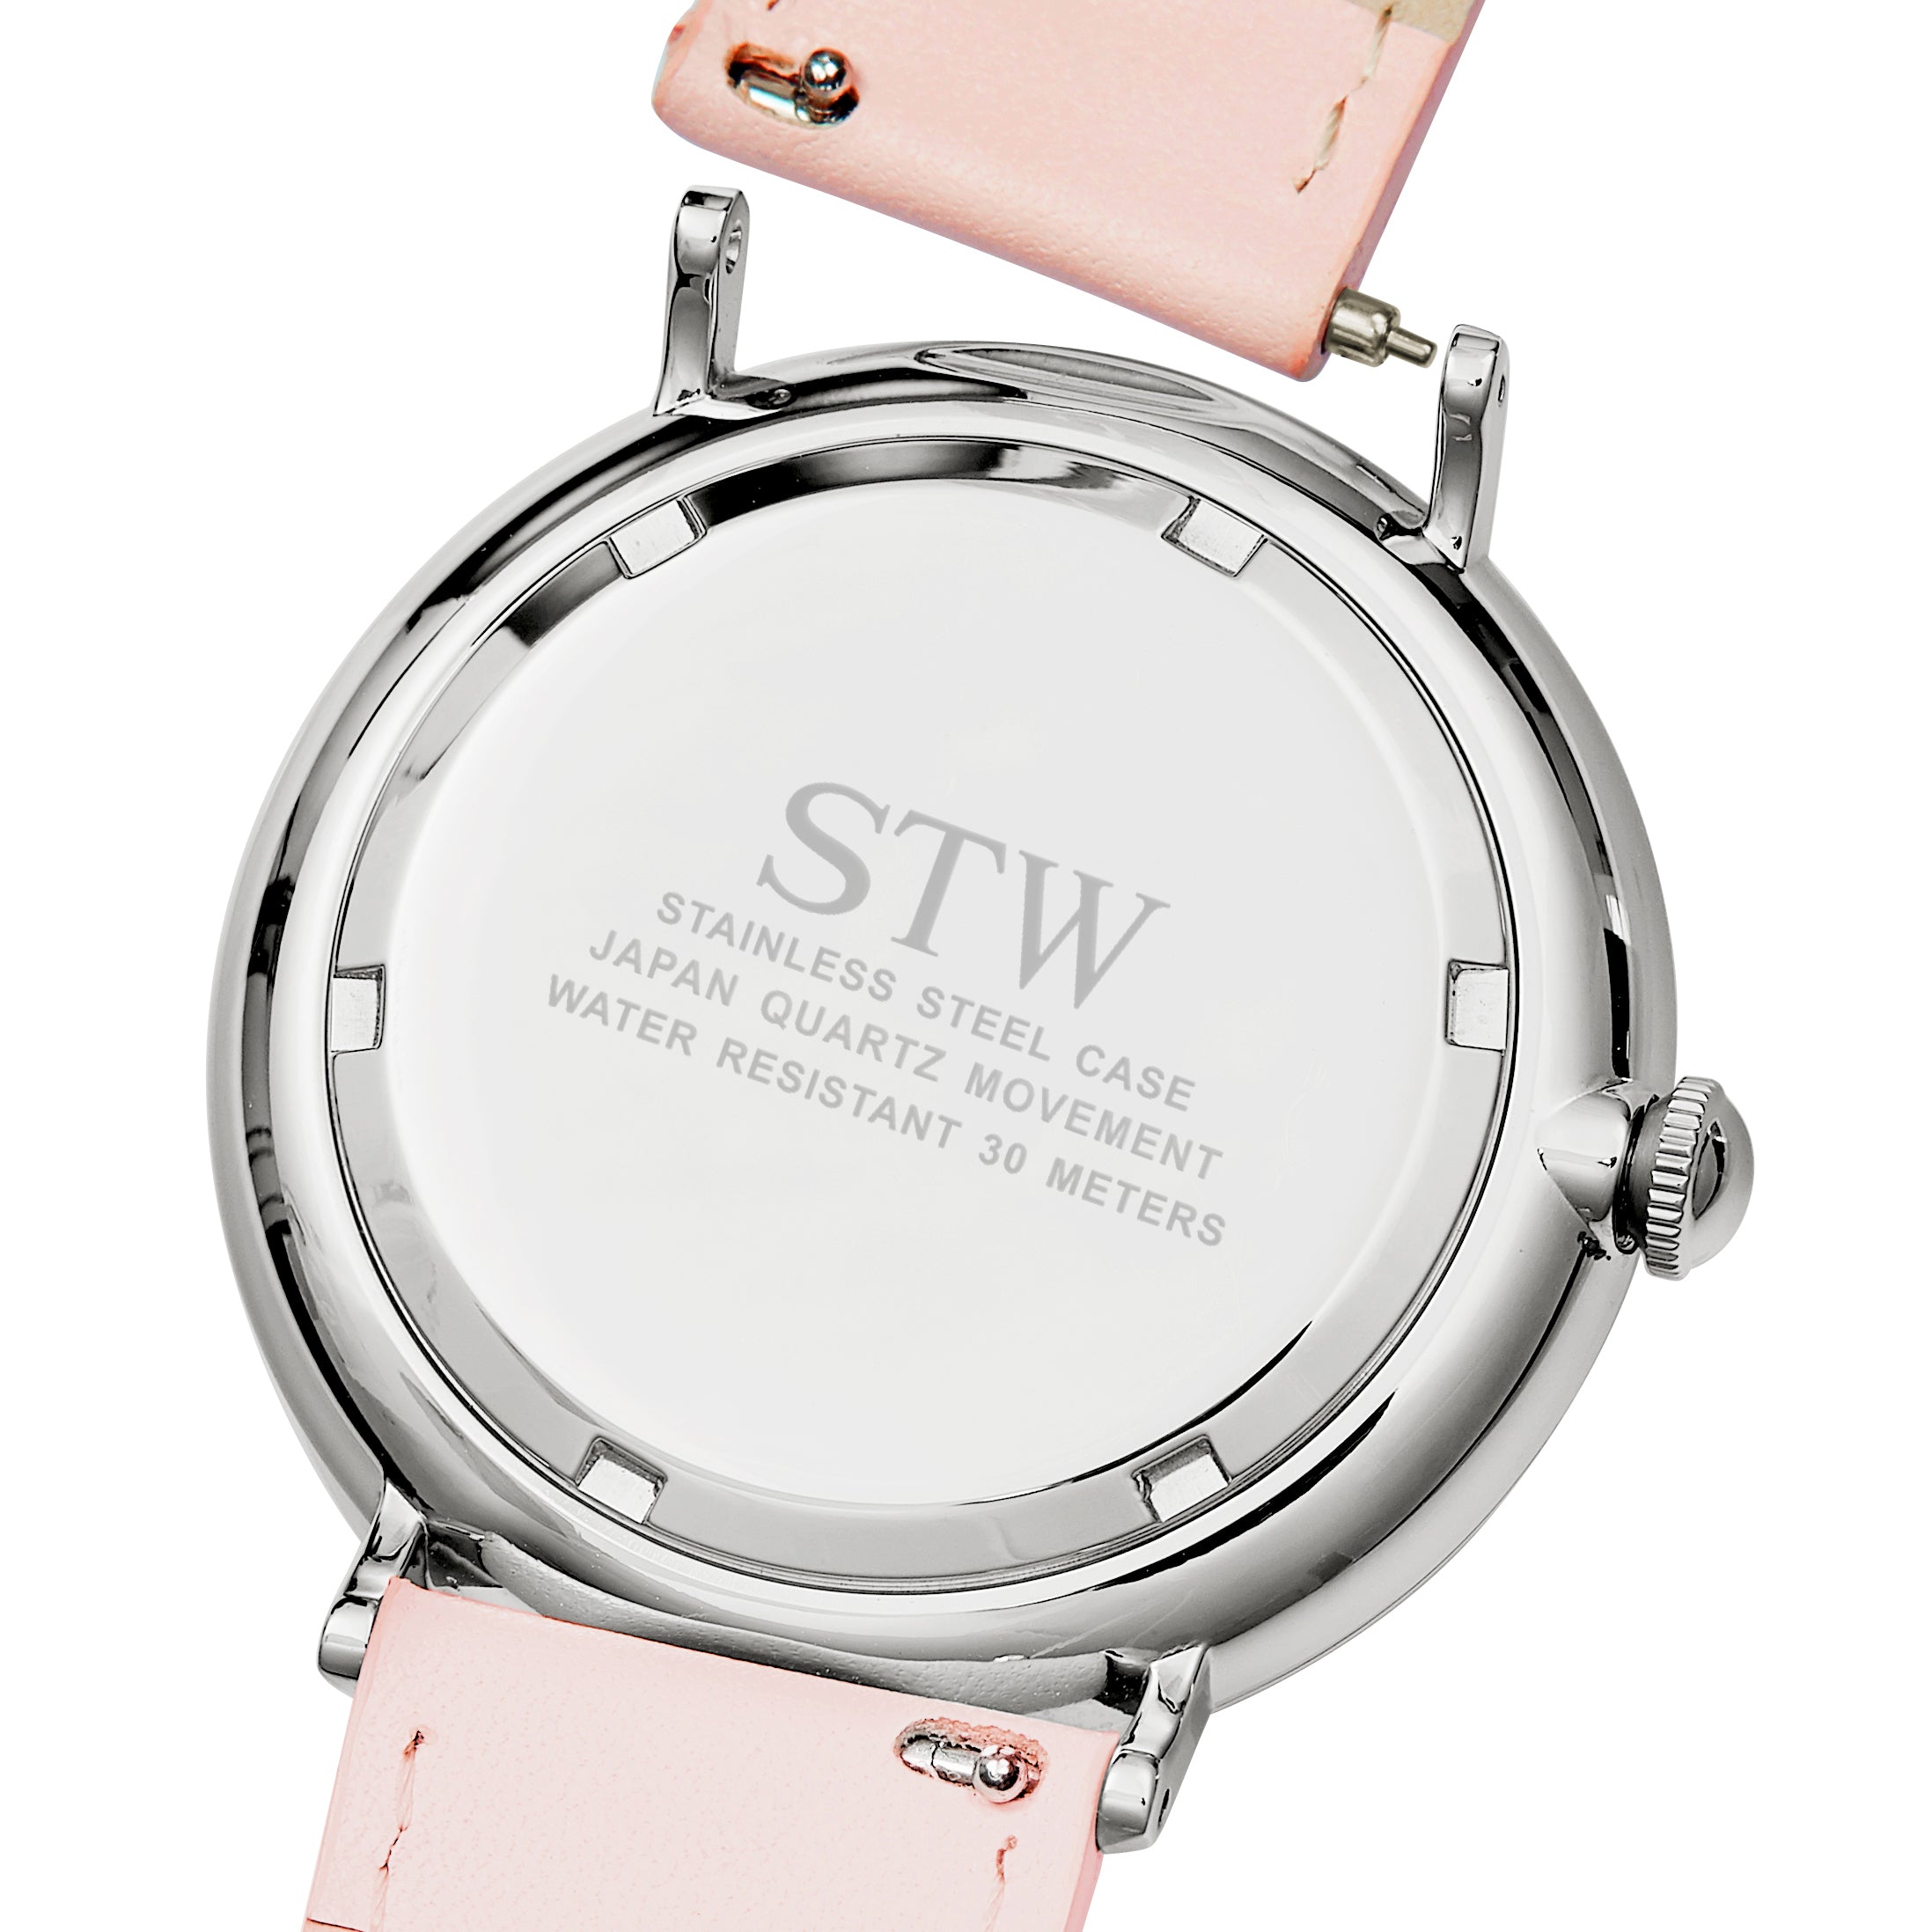 THE HERITAGE -  WHITE DIAL / BABY PINK LEATHER STRAP WATCH